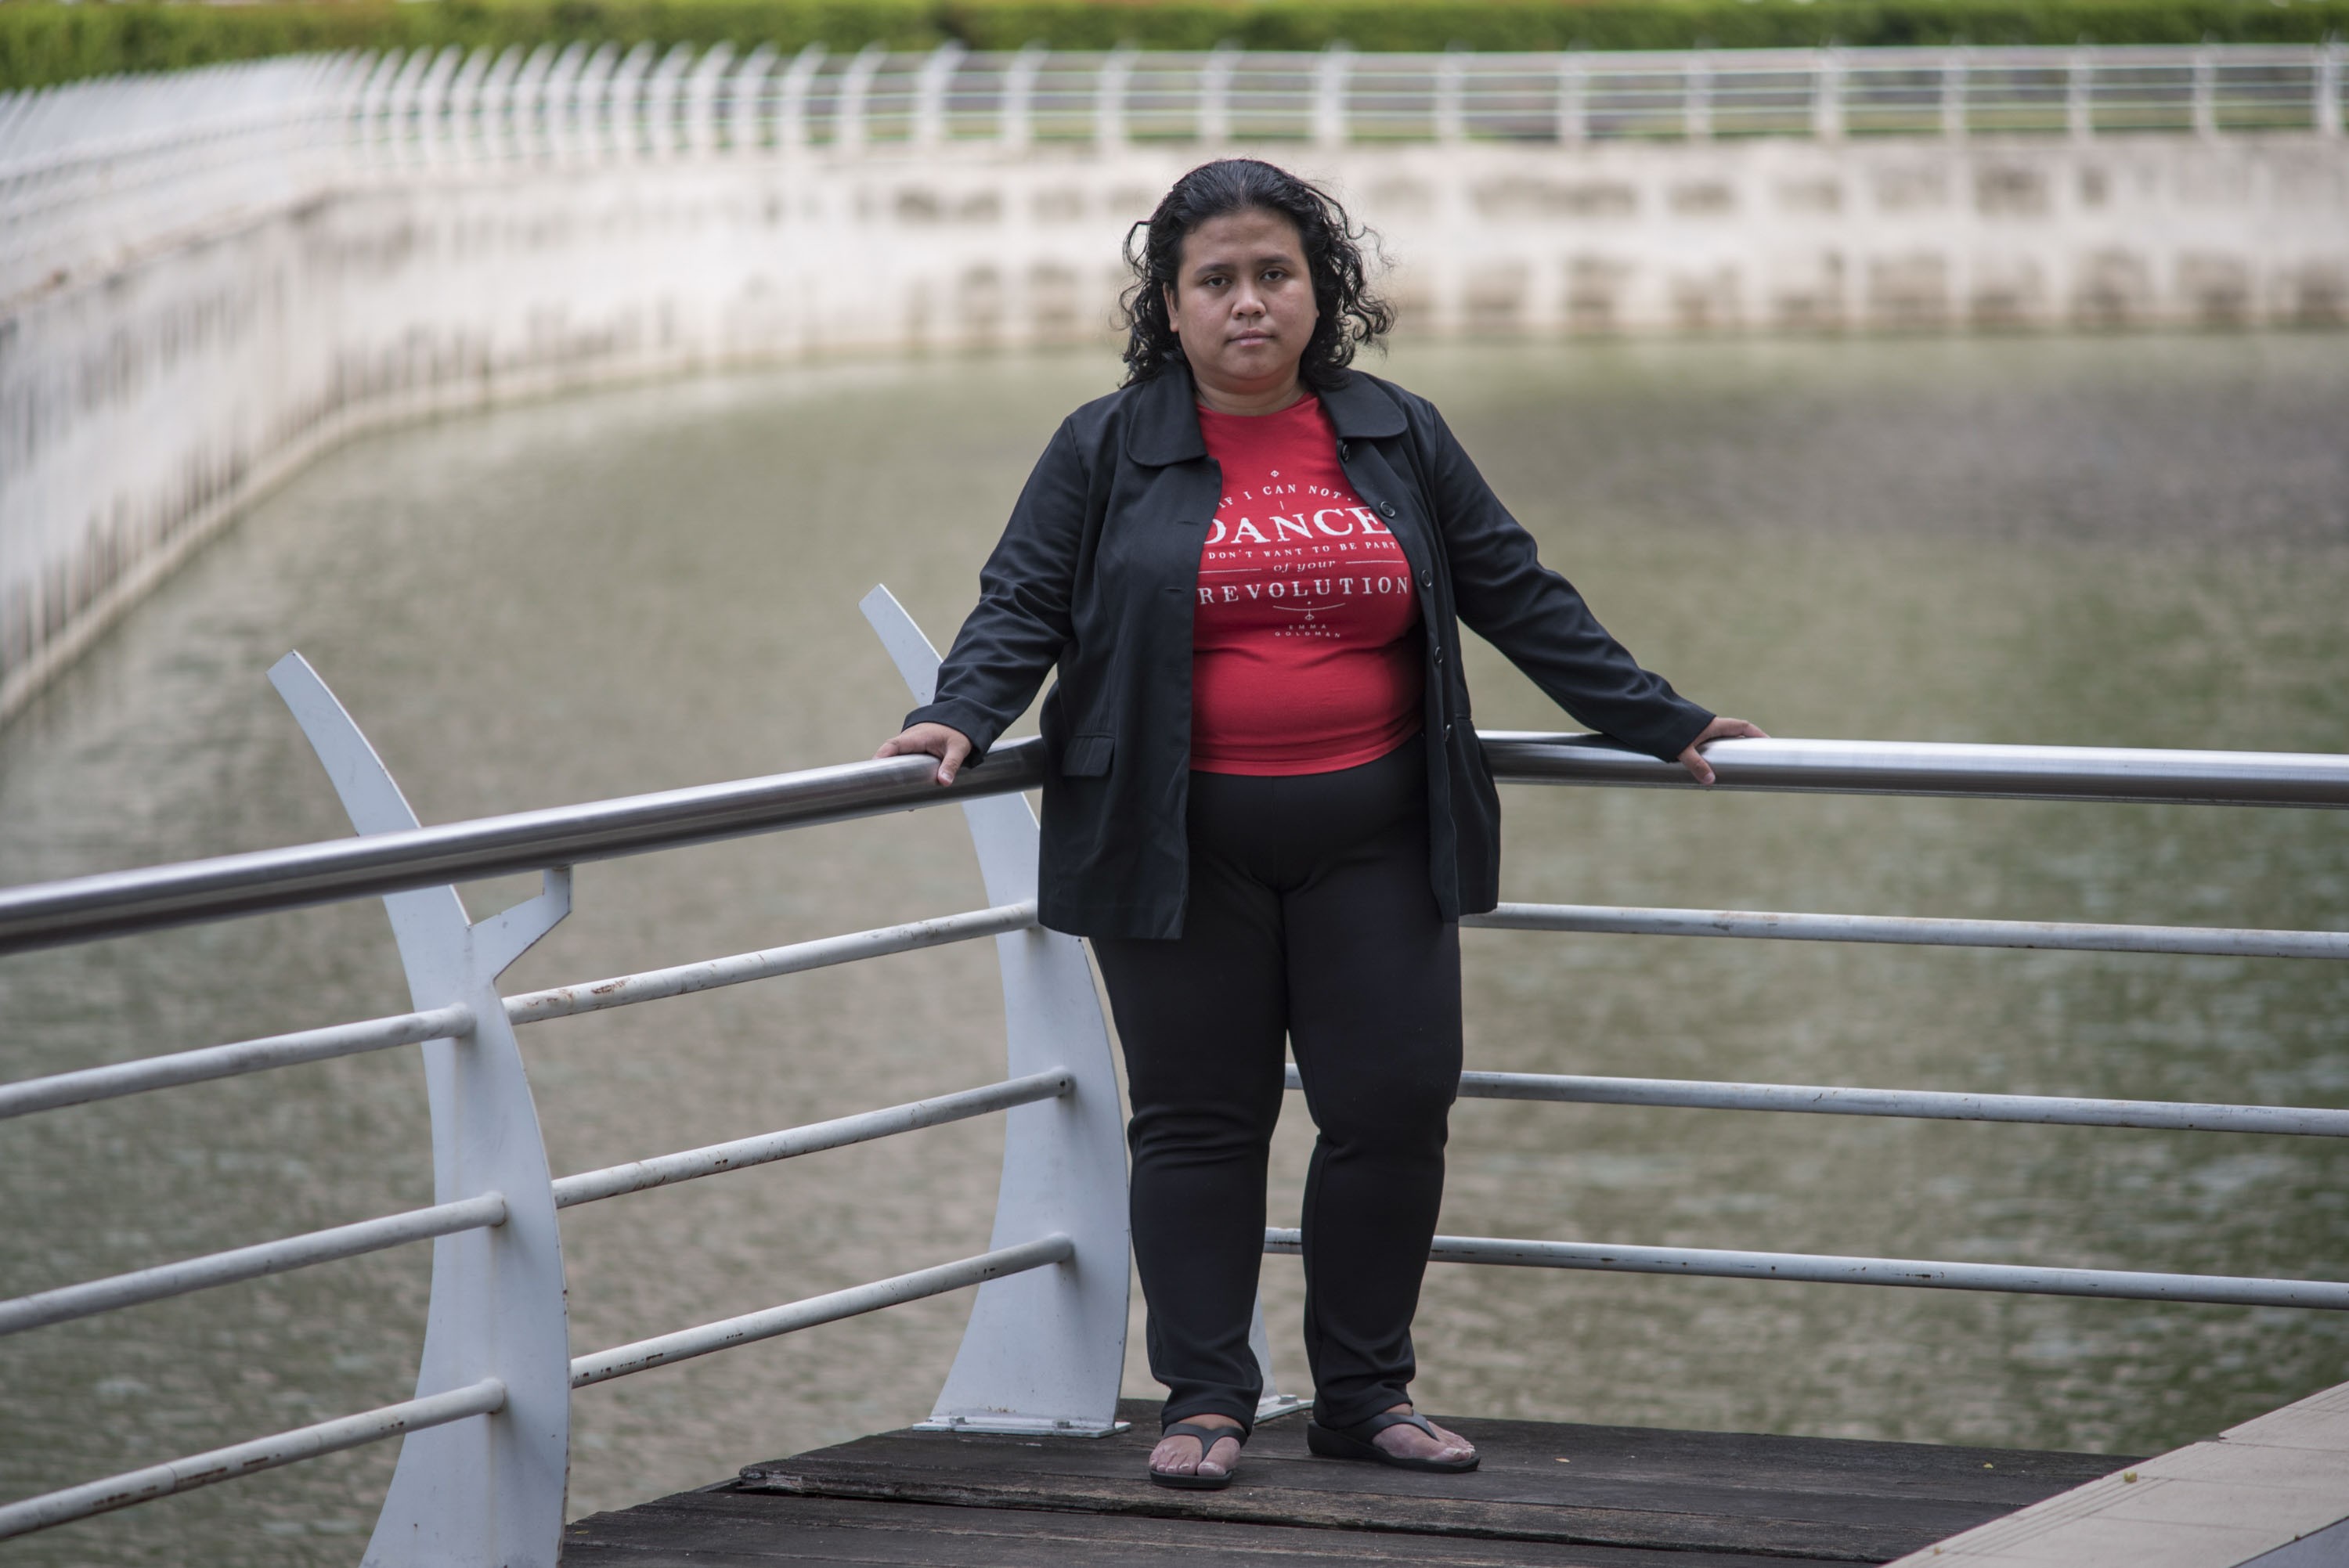 Ruby Astari was bullied as a child and adolescent, and has experienced severe depression and suicidal thoughts. Photo: Antony Dickson